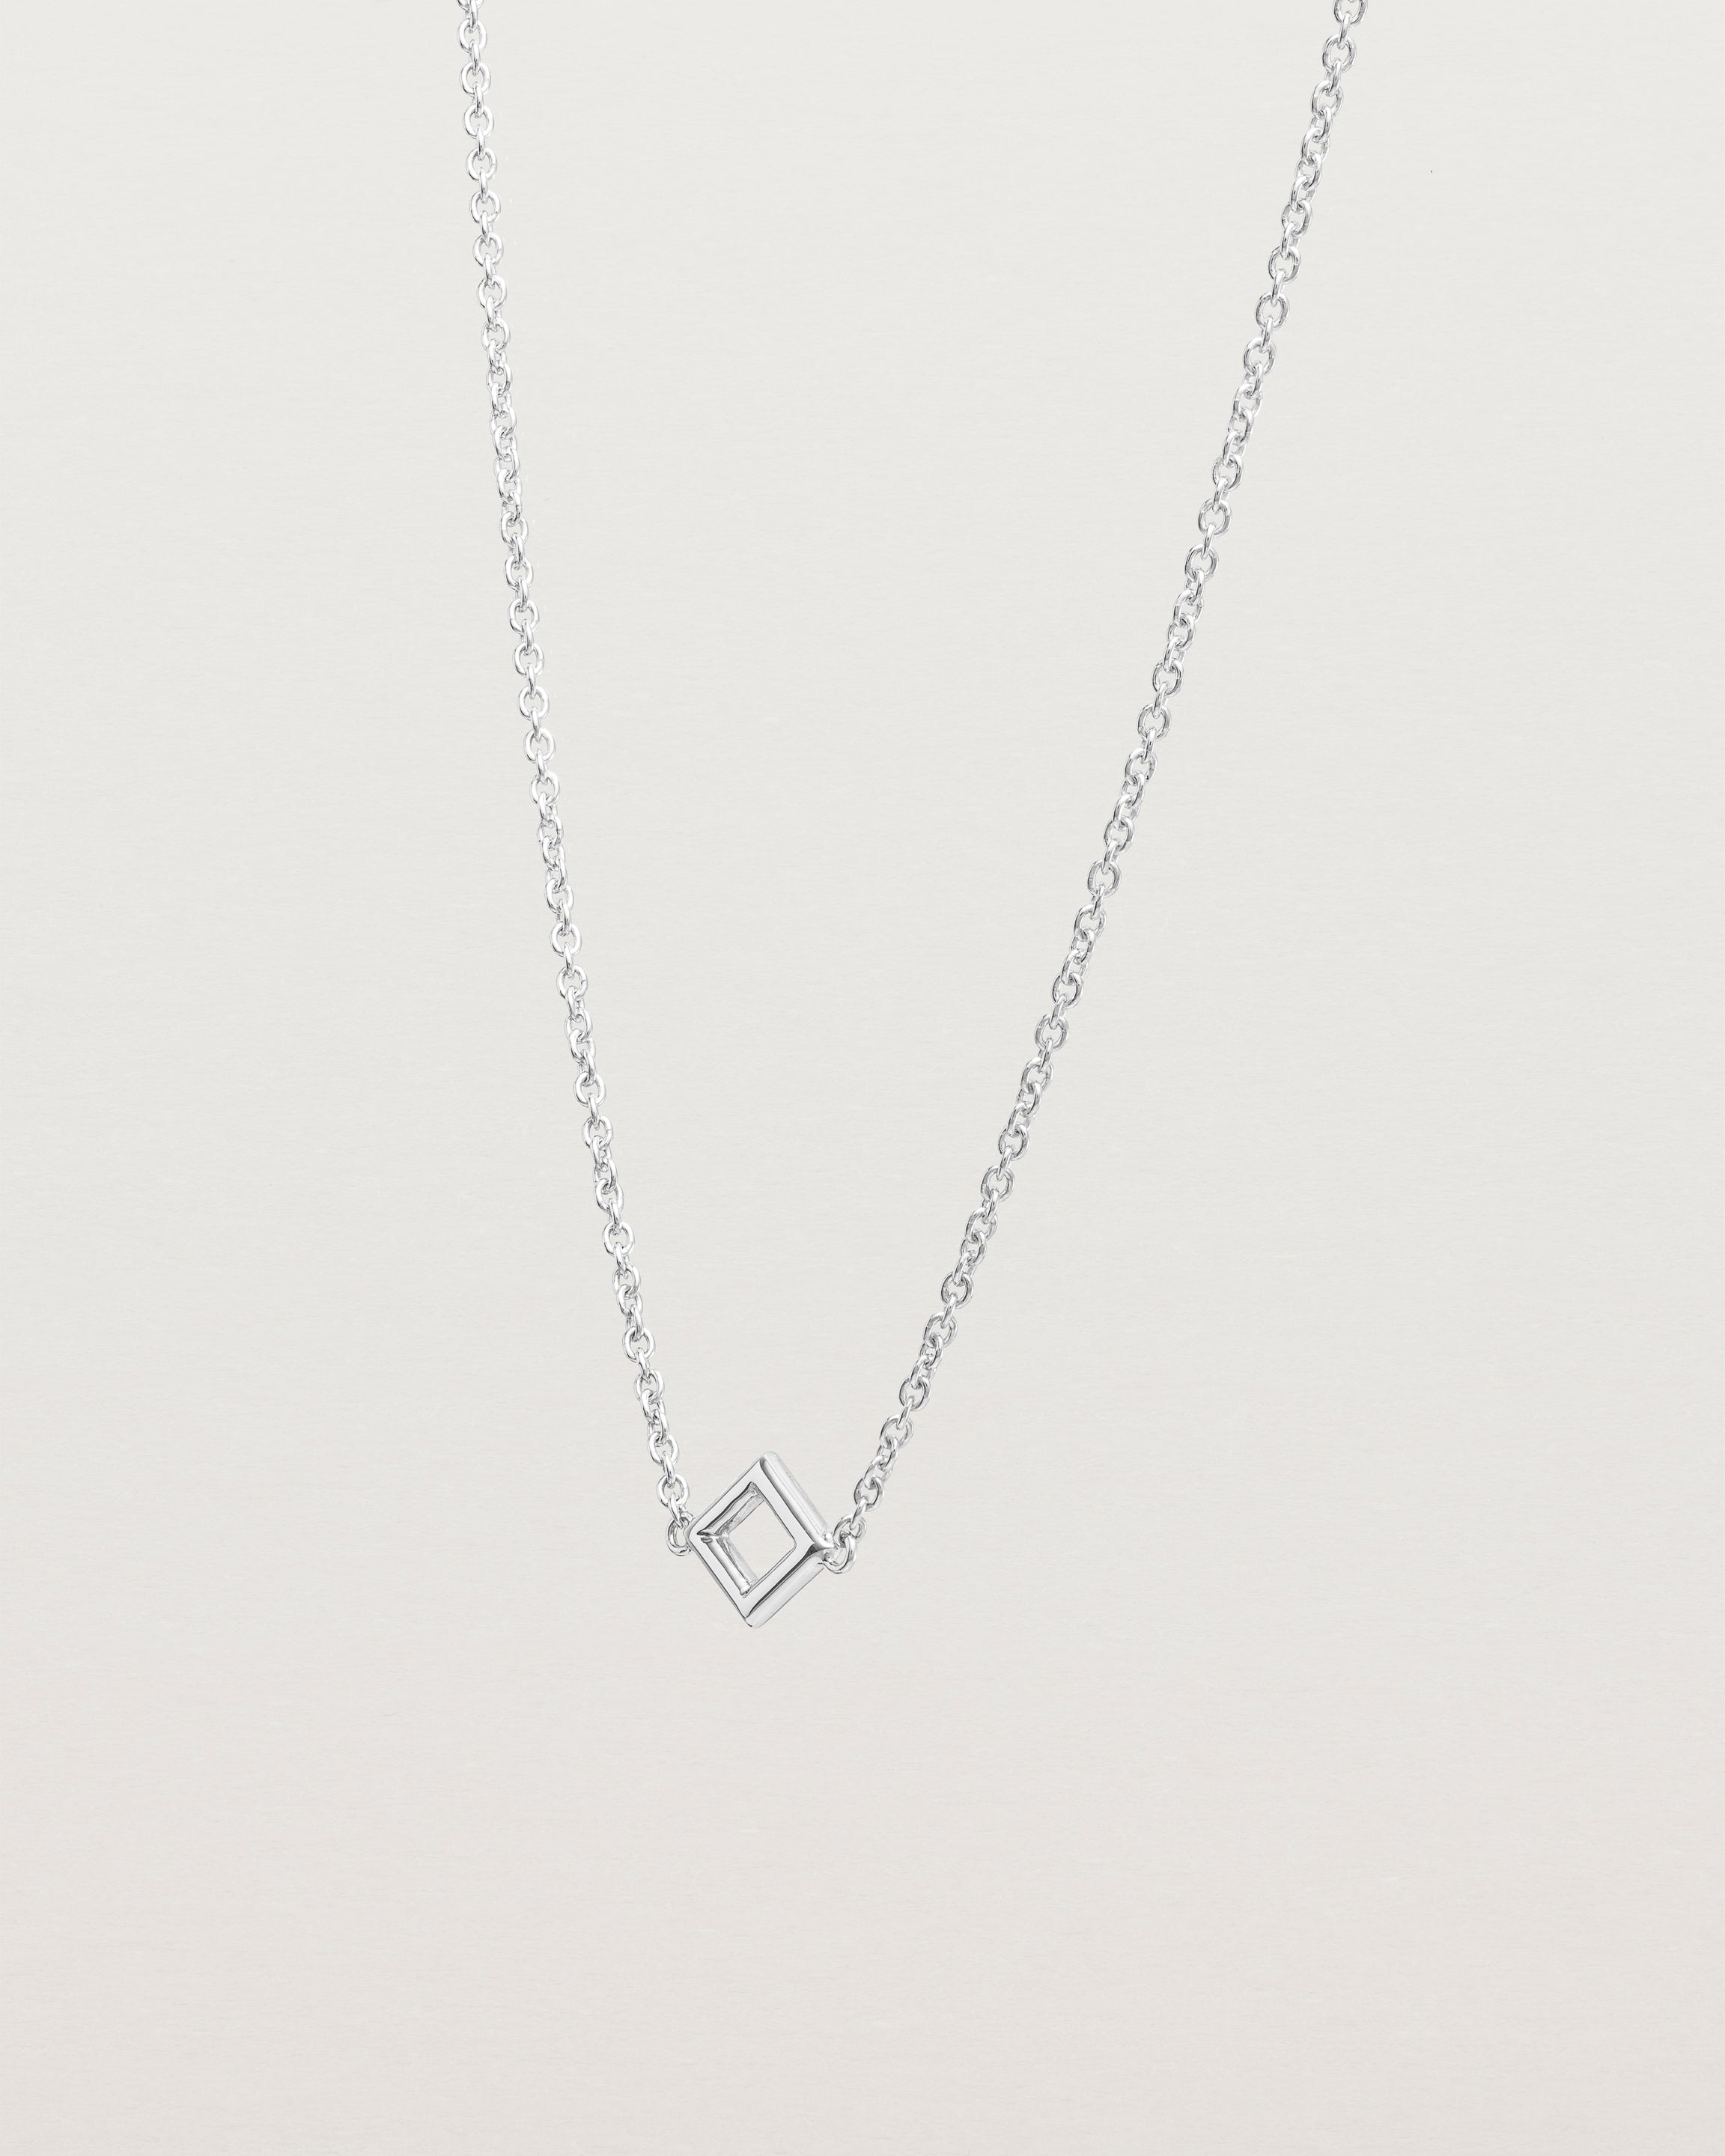 Angled view of the Nuna Necklace | Sterling Silver.